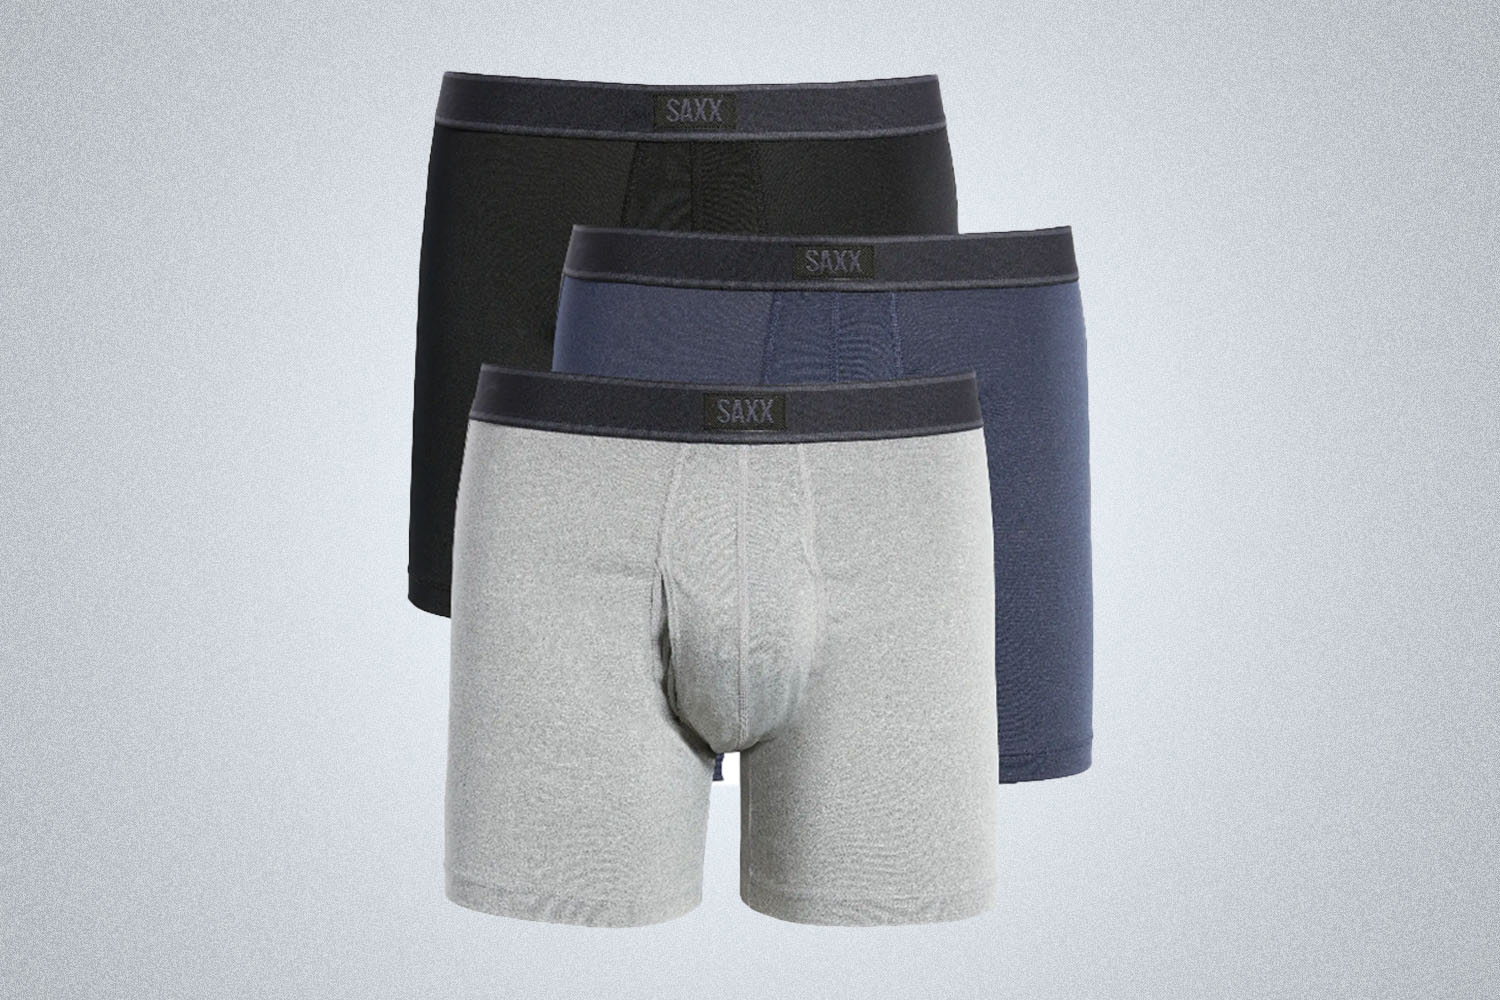 three pairs of overlayed boxers in black, blue and grey from SAXX on a grey background